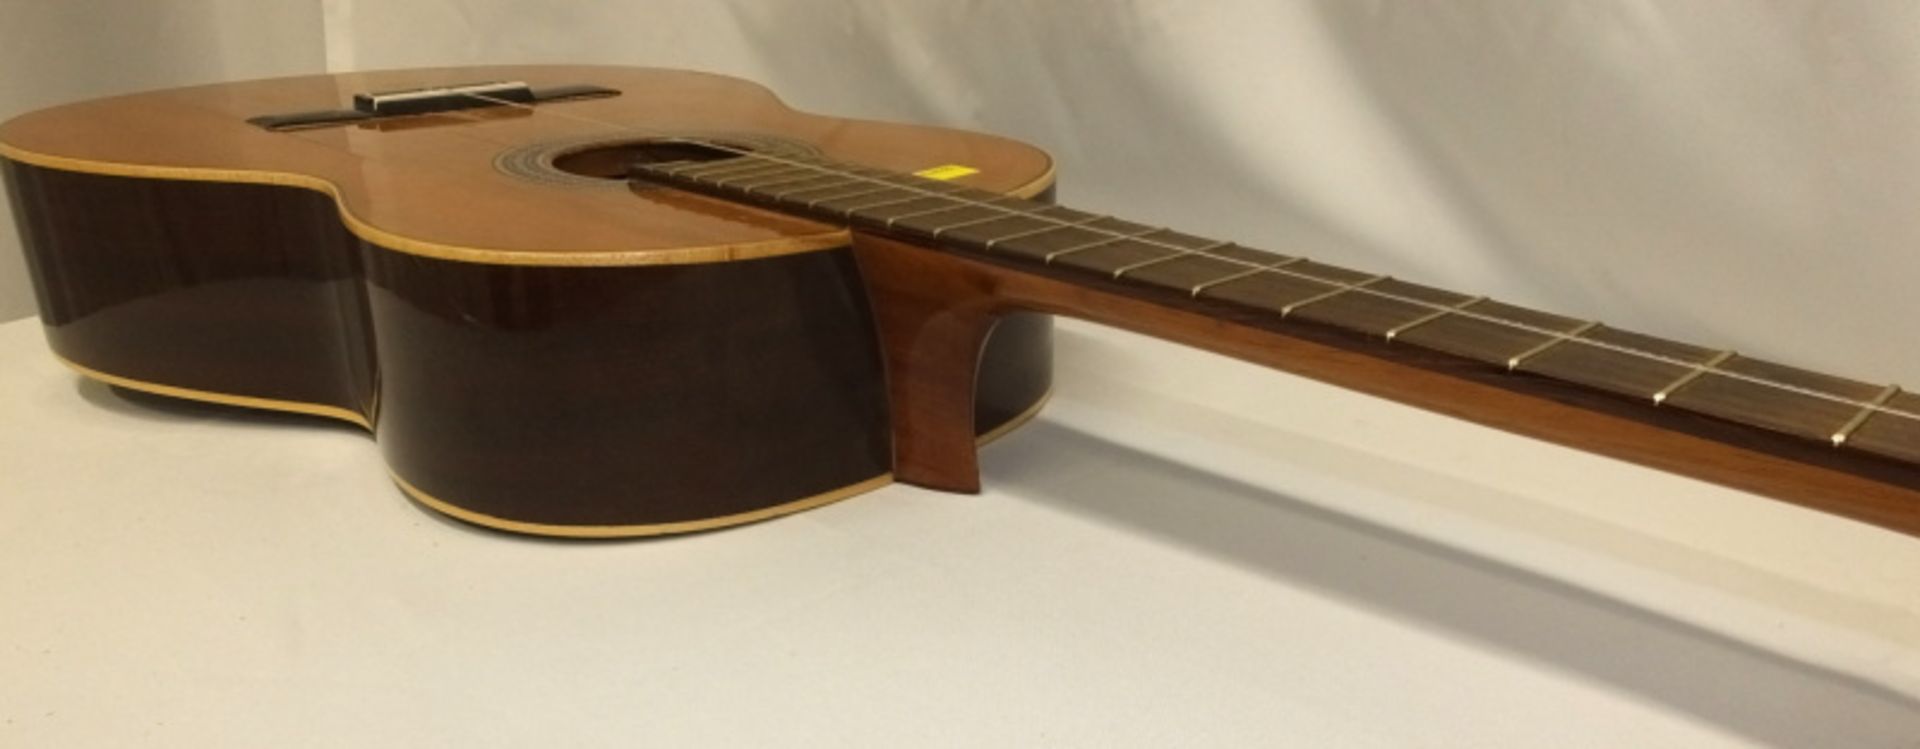 Vicente Sanchis Constructor 28s Acoustic Guitar in case (needs new strings) - Image 10 of 13